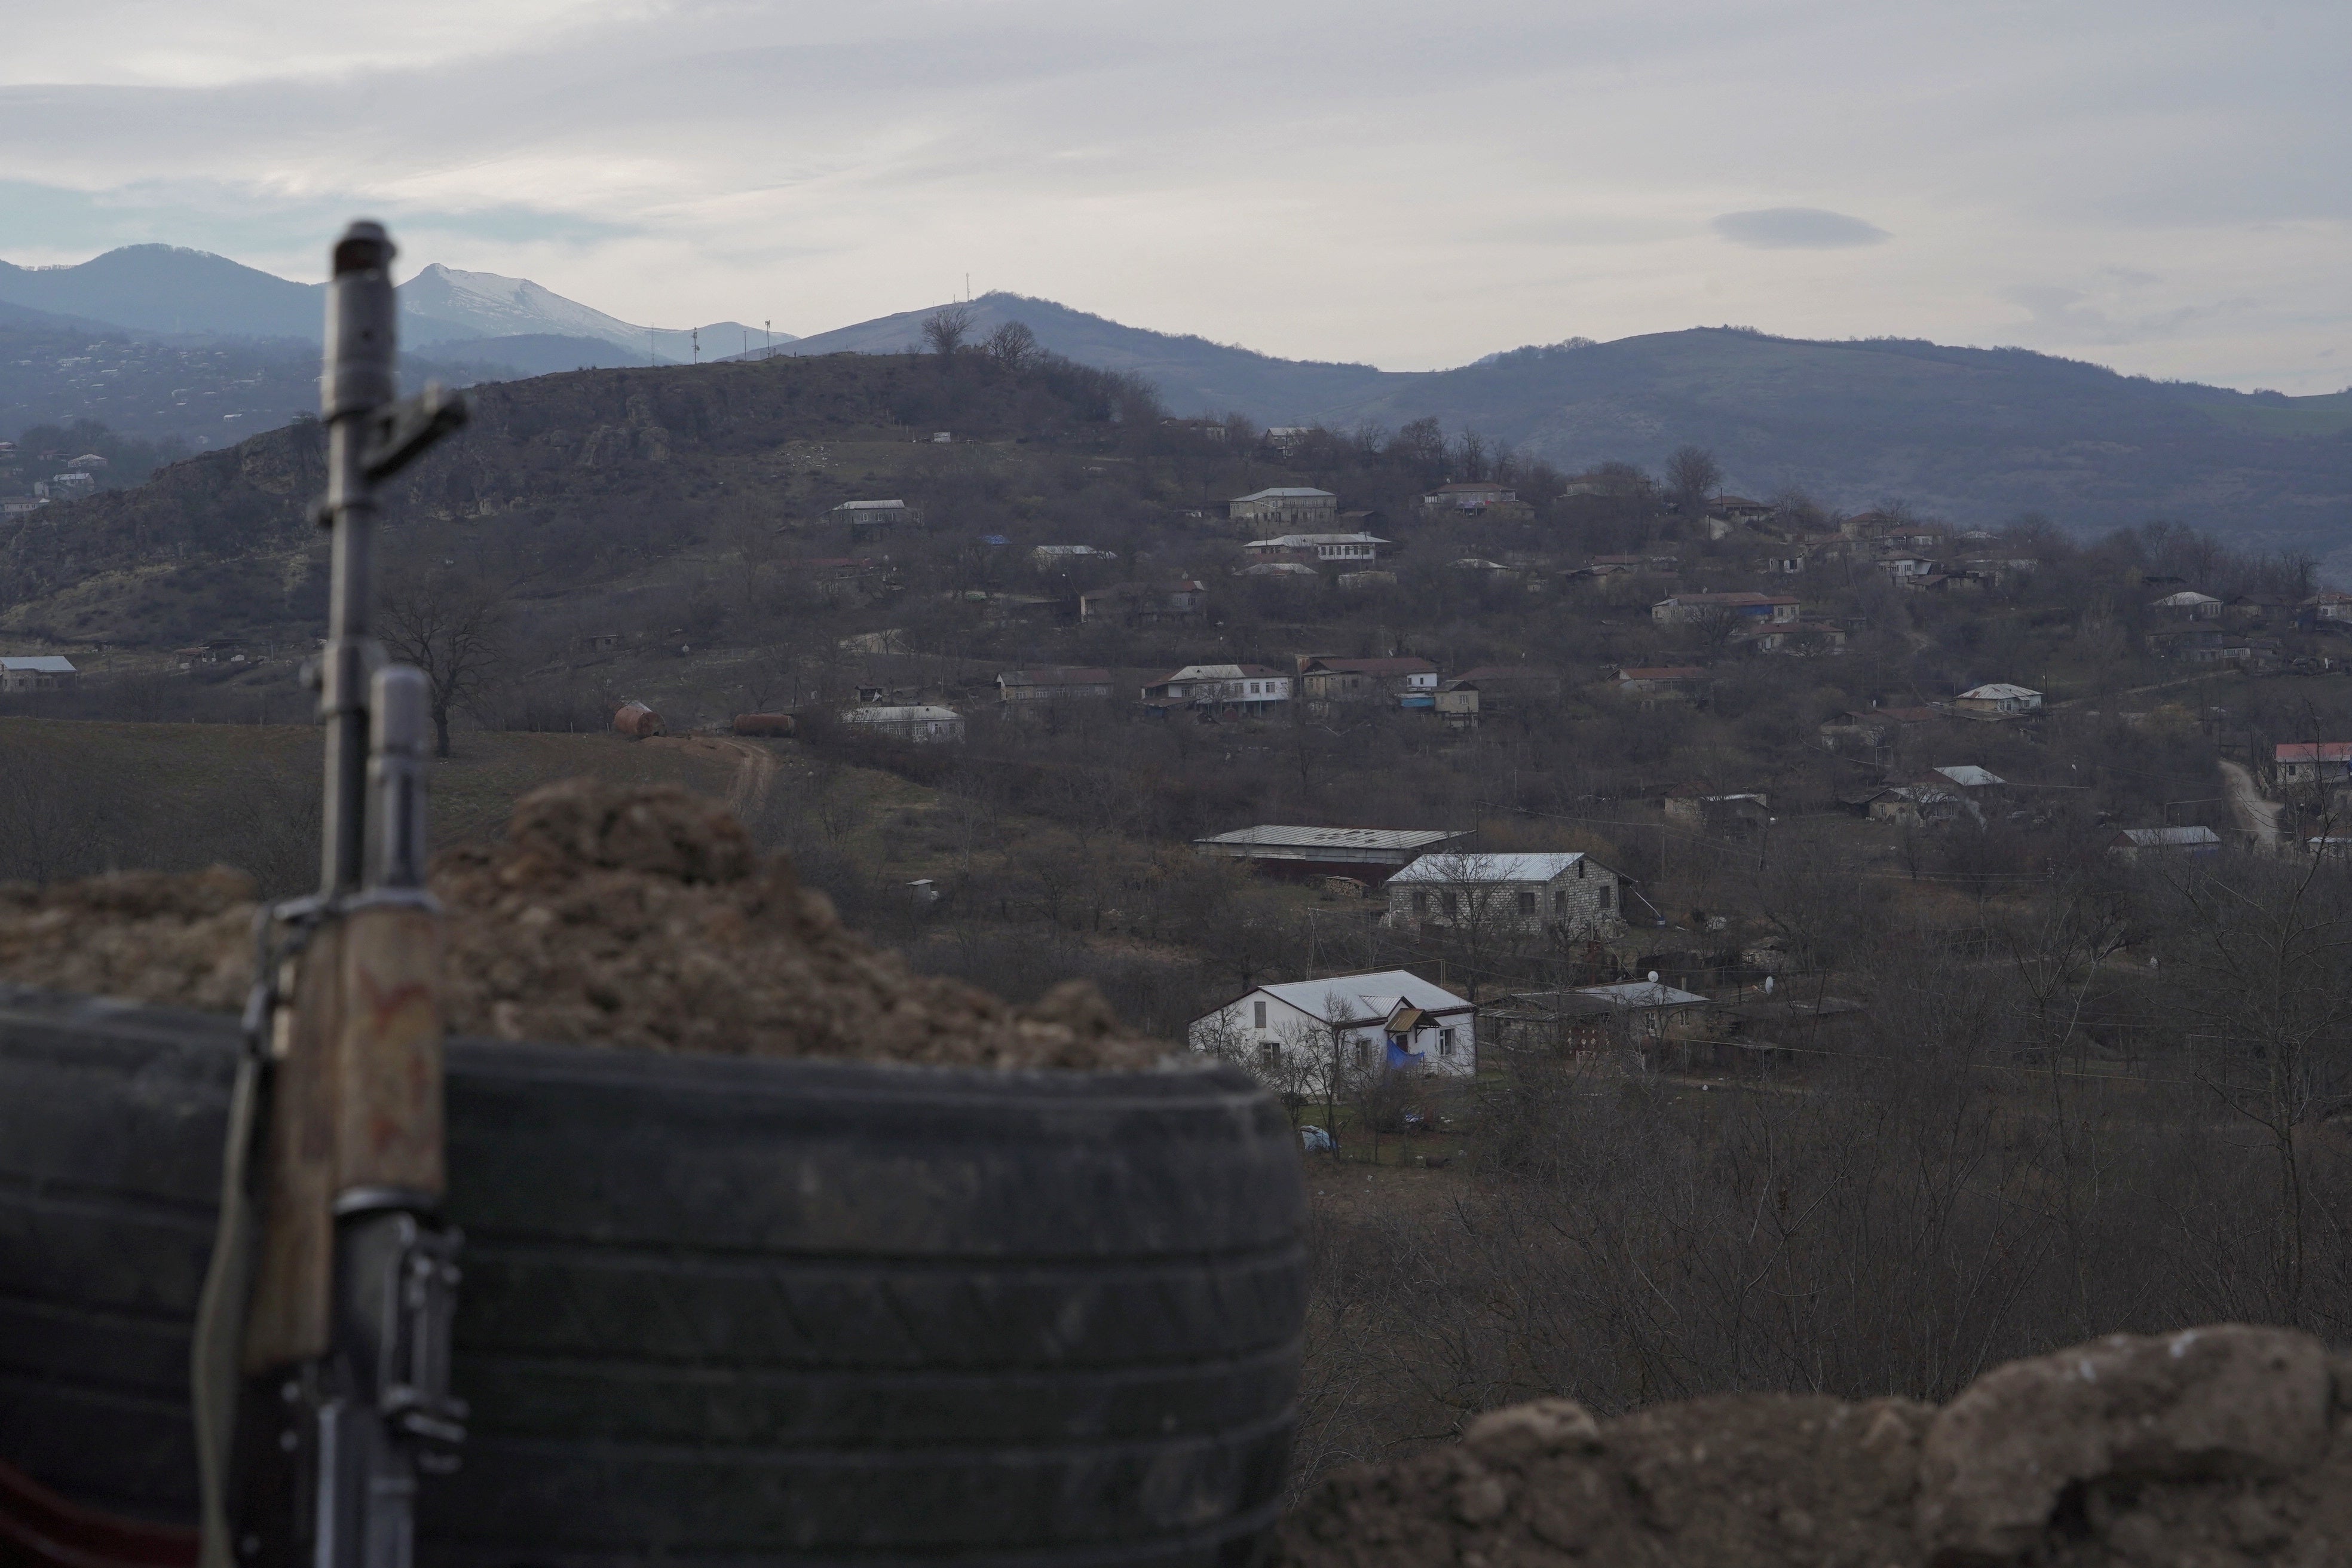 A view shows the village of Taghavard in the region of Nagorno-Karabakh